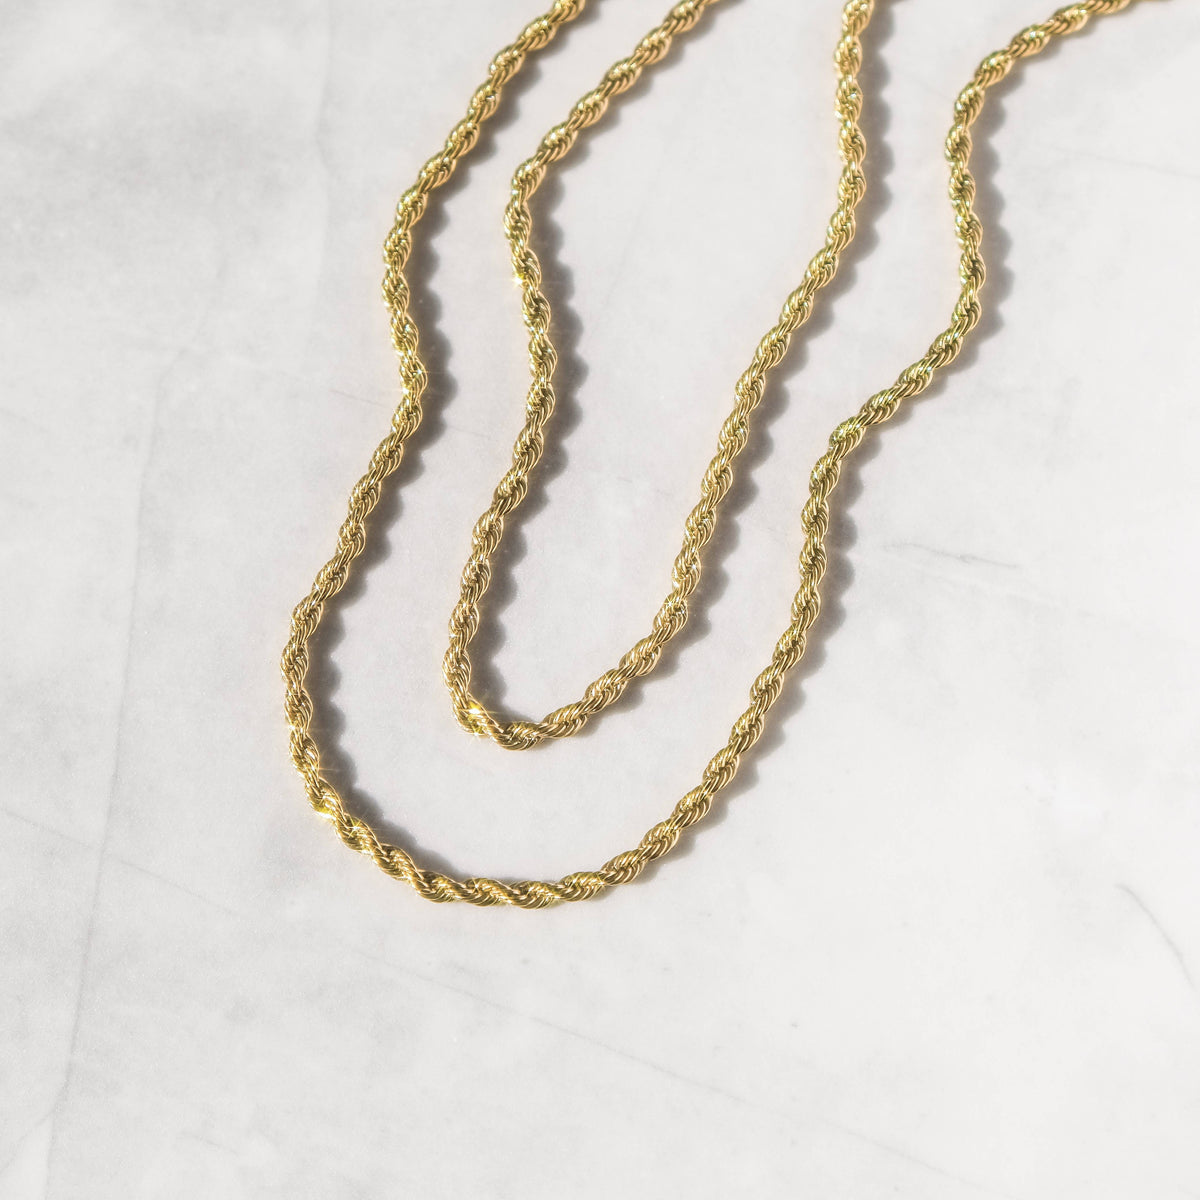 3MM ROPE CHAIN - 18K GOLD